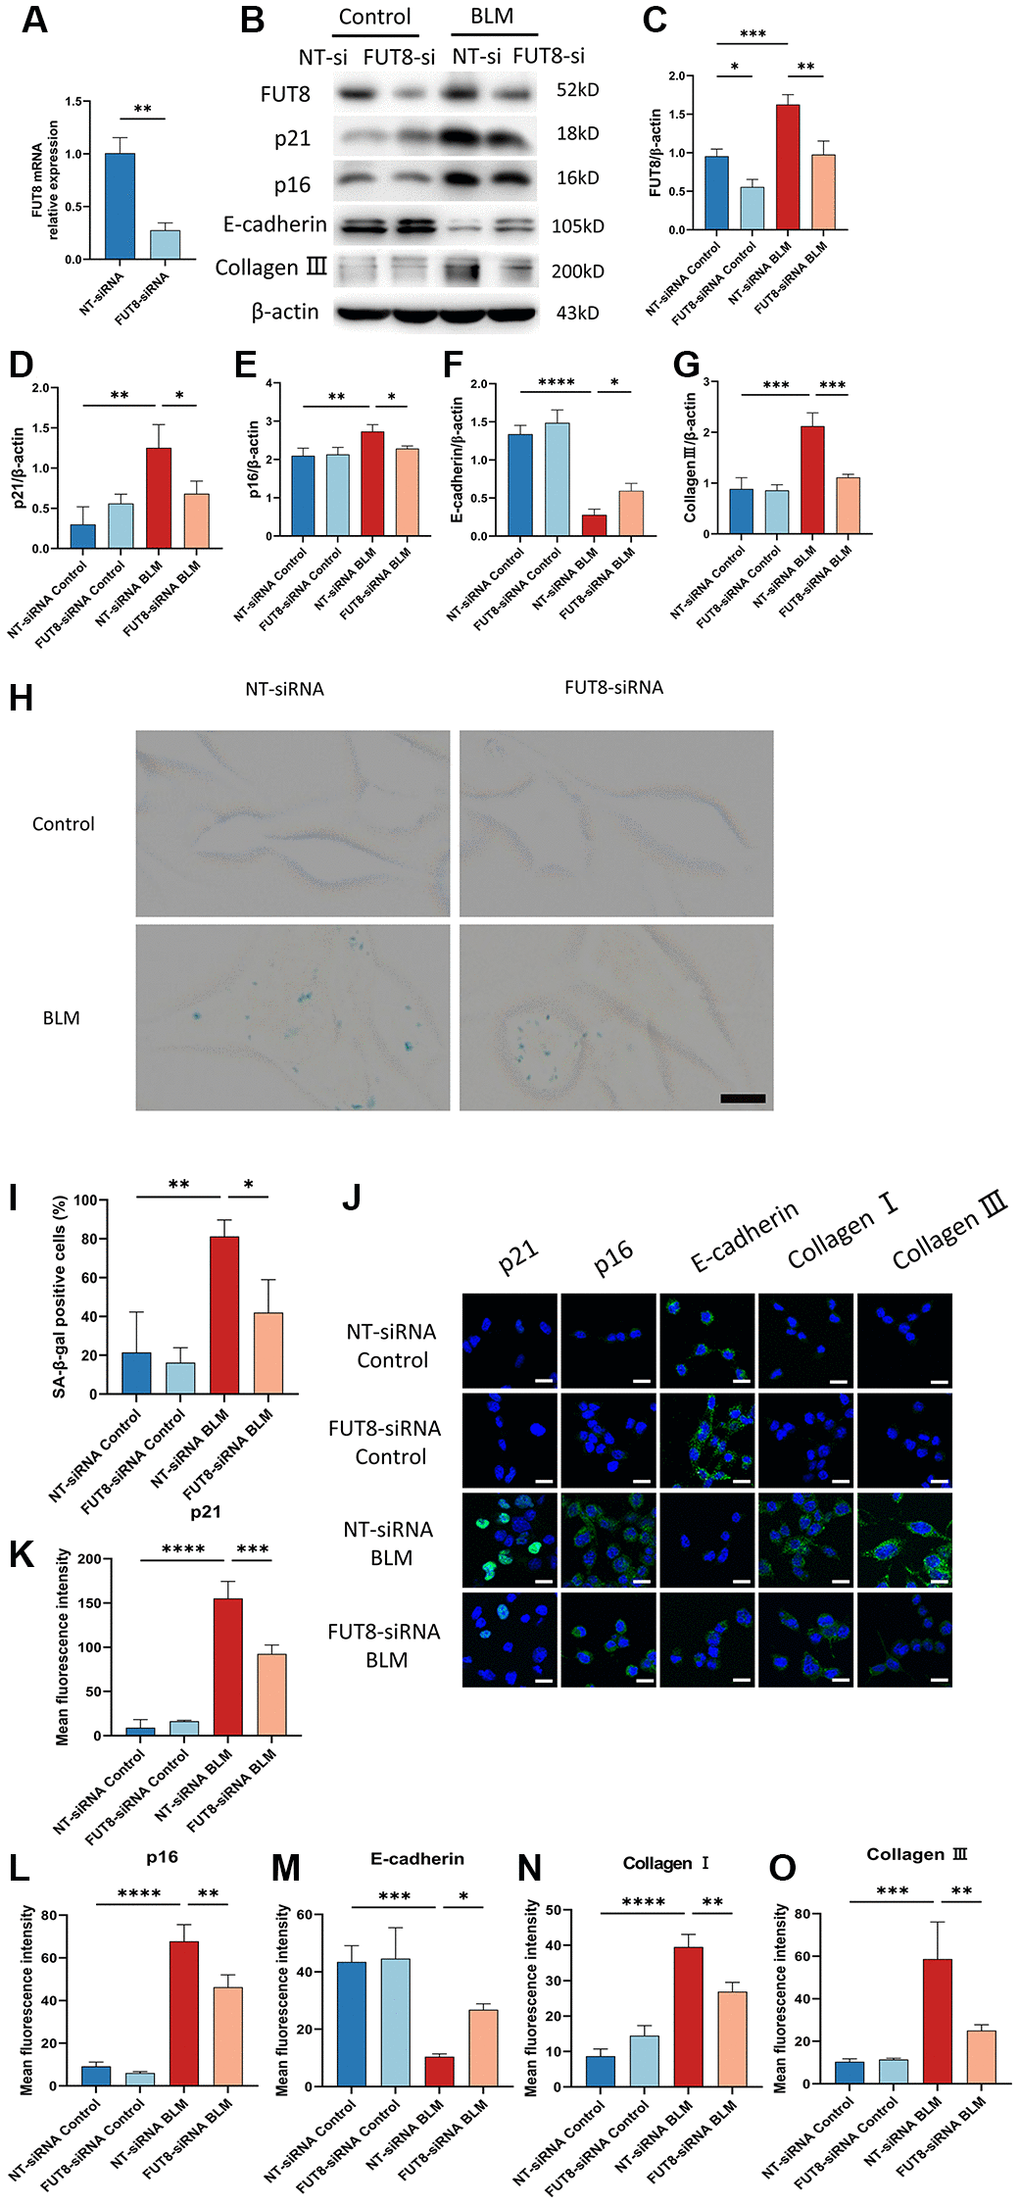 Silencing CF modifications with FUT8 siRNA rescues AECs from senescence and attenuates BLM-induced lung fibrosis. NT siRNA or FUT8 siRNA was used to transfect MLE12 cells, which were subsequently treated or untreated with BLM for 48 hours. (A) To test the gene silencing effect, we use real-time polymerase chain reaction (RT-PCR) to show FUT8 mRNA expression in MLE12 cells transfected with NT siRNA or FUT8 siRNA. **P t-test). (B–G) Western blotting using anti-FUT8, anti-p21, anti-p16, anti-E-cadherin, anti-collagen III, and anti-β-actin antibodies in MLE12 cells treated in different ways. Densitometric analyses of the bands were adjusted to be equal to β-actin. Data were presented as the mean ± SD. *P **P ***P ****P H, I) SA-β-gal staining reveals indicative pictures of different treated MLE12 cells. Scale bar, 10 μm. Data were presented as the mean ± SD. *P **P J–O) E-cadherin, p21WAF1, p16ink4a, collagen I, and collagen III expressions were measured via the immunofluorescence technique. Scale bar 25 μm. Data were presented as the mean ± SD. *P **P ***P ****P 